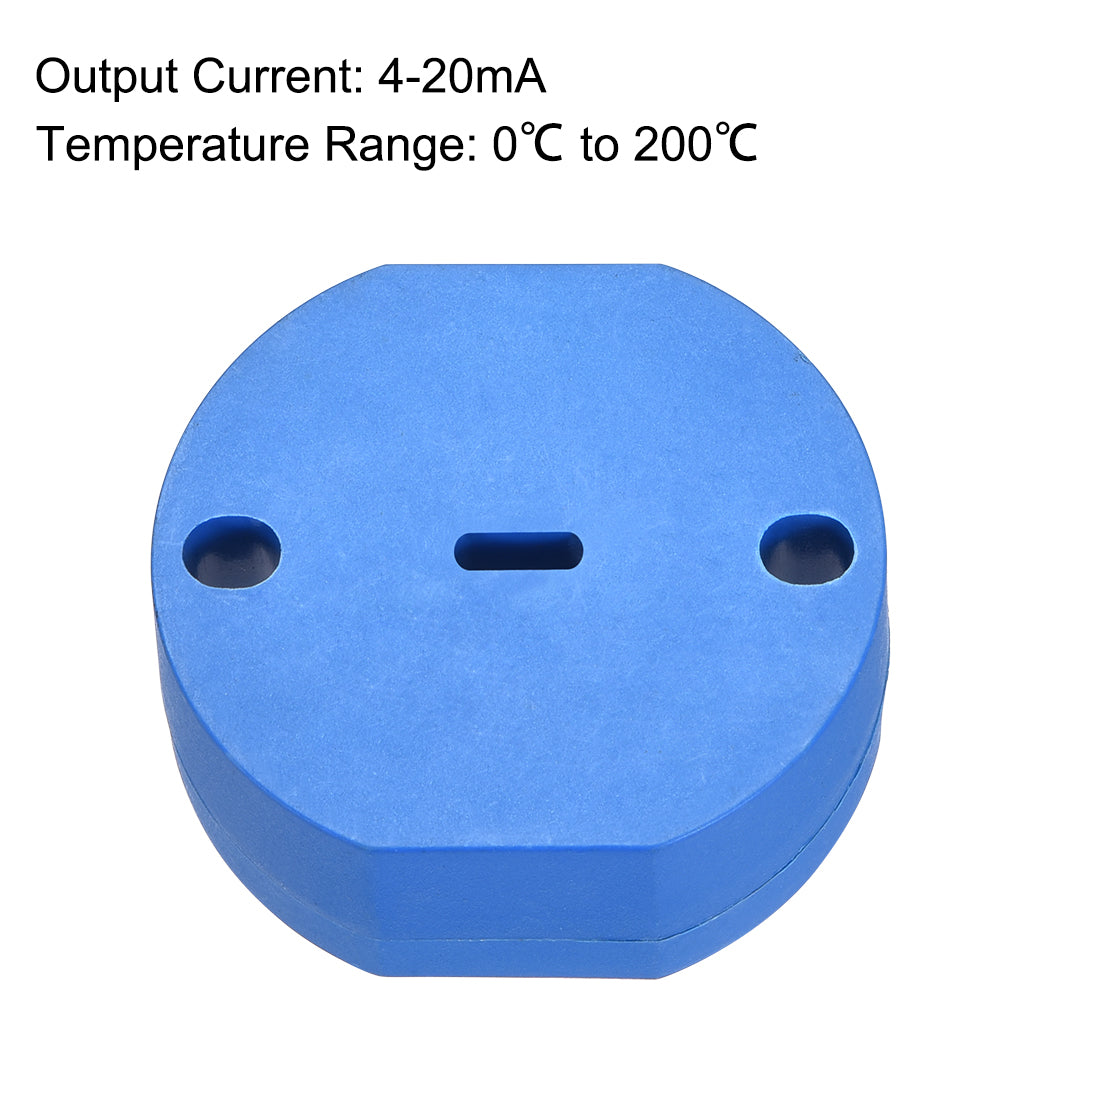 uxcell Uxcell PT100 Temperature Sensor Transmitter 24V DC 4-20mA 0℃ to 200℃